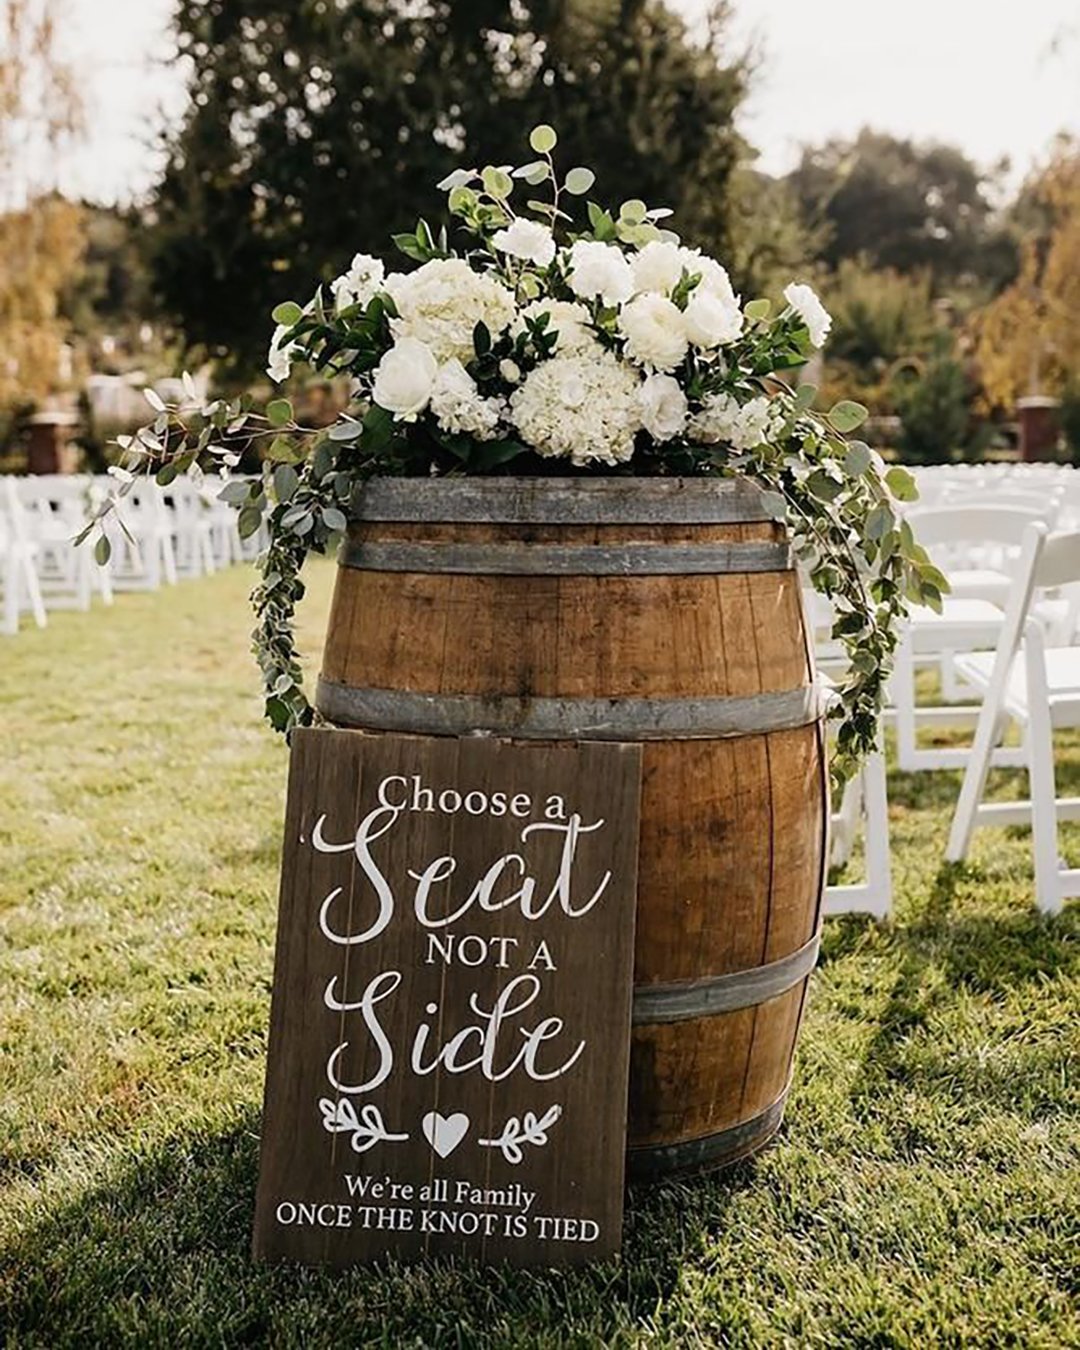 rustic wedding decor for outdoor aisle with winebarrel greenery and white flowers nicole leever photography